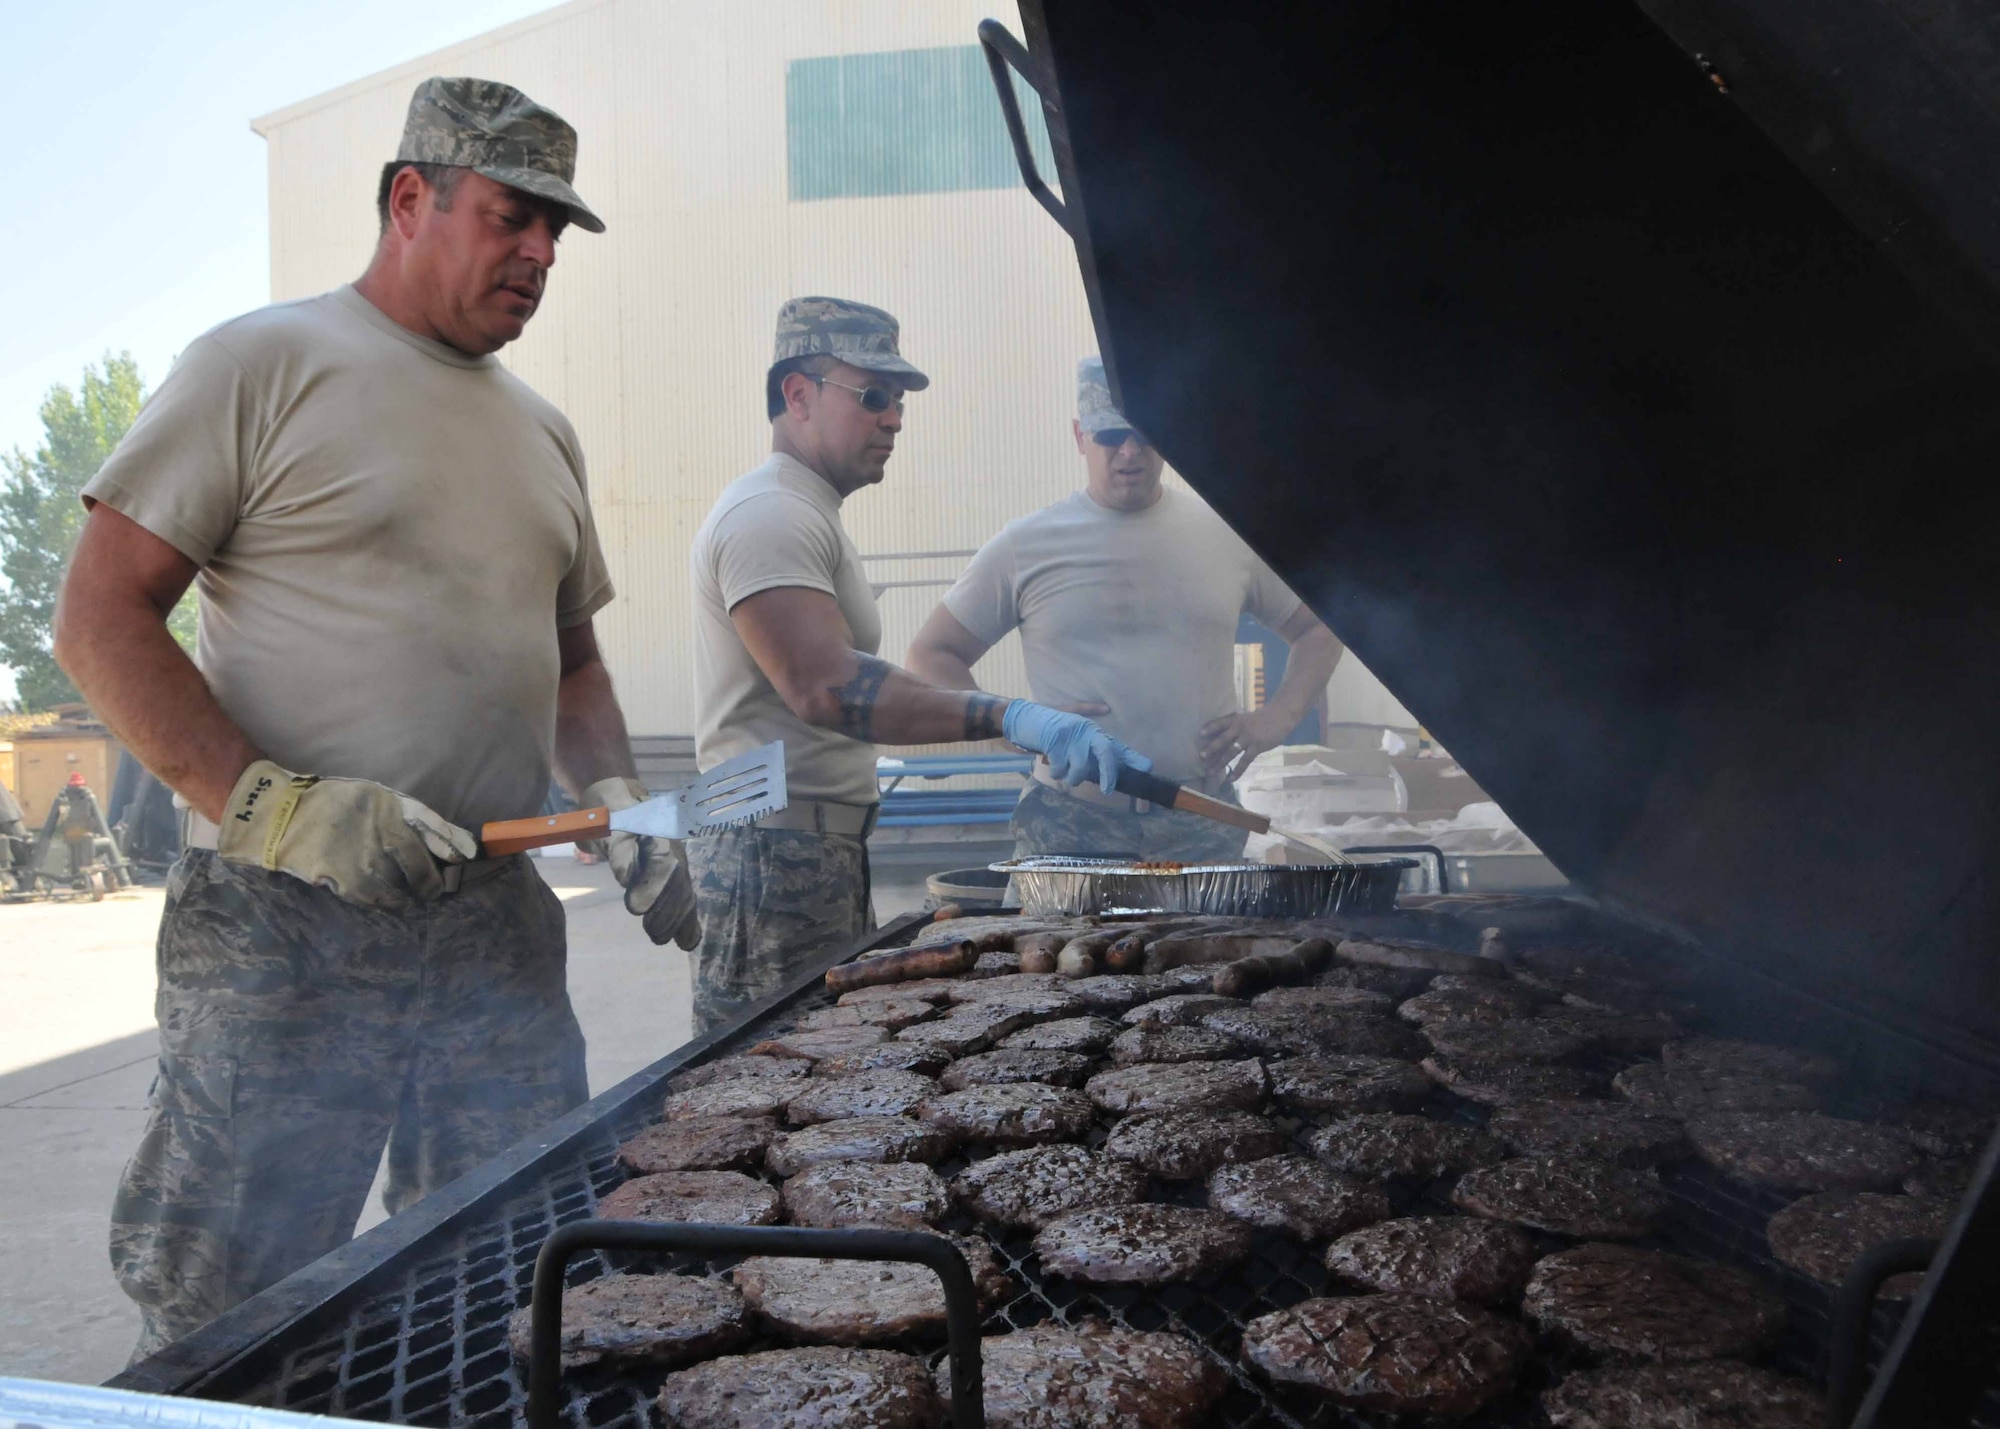 Master Sgt. Glenn T. Bosch (left), Maj. Jesse Ortega (middle), and Chief Master Sgt. Joseph A. Parlato work the grill for a senior enlisted leader sponsored burger burn at the 313th Air Expeditionary Wing on Thursday July 28, 2011 in Western Europe. (U.S. Air Force photo/Capt. John Capra)